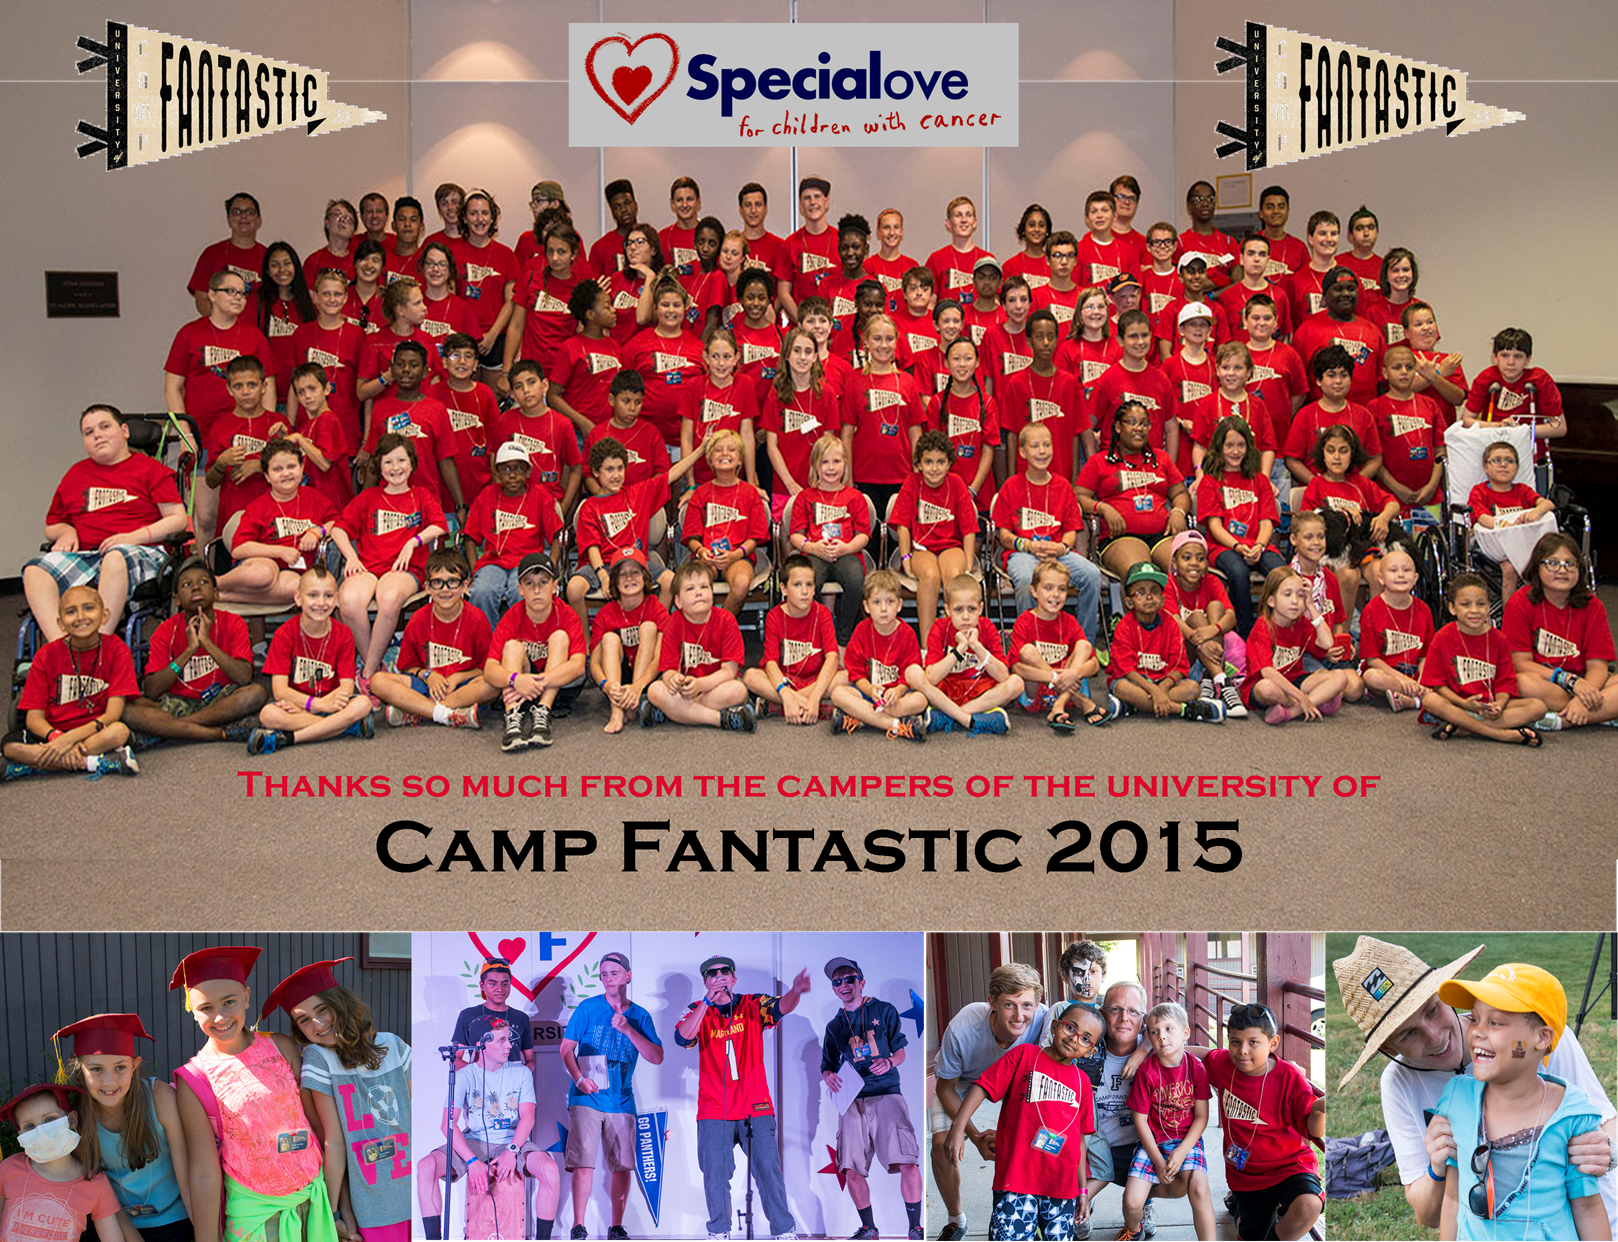 Photos from 2015 Camp Fantastic. See more at facebook.com/SpecialoveCamps.